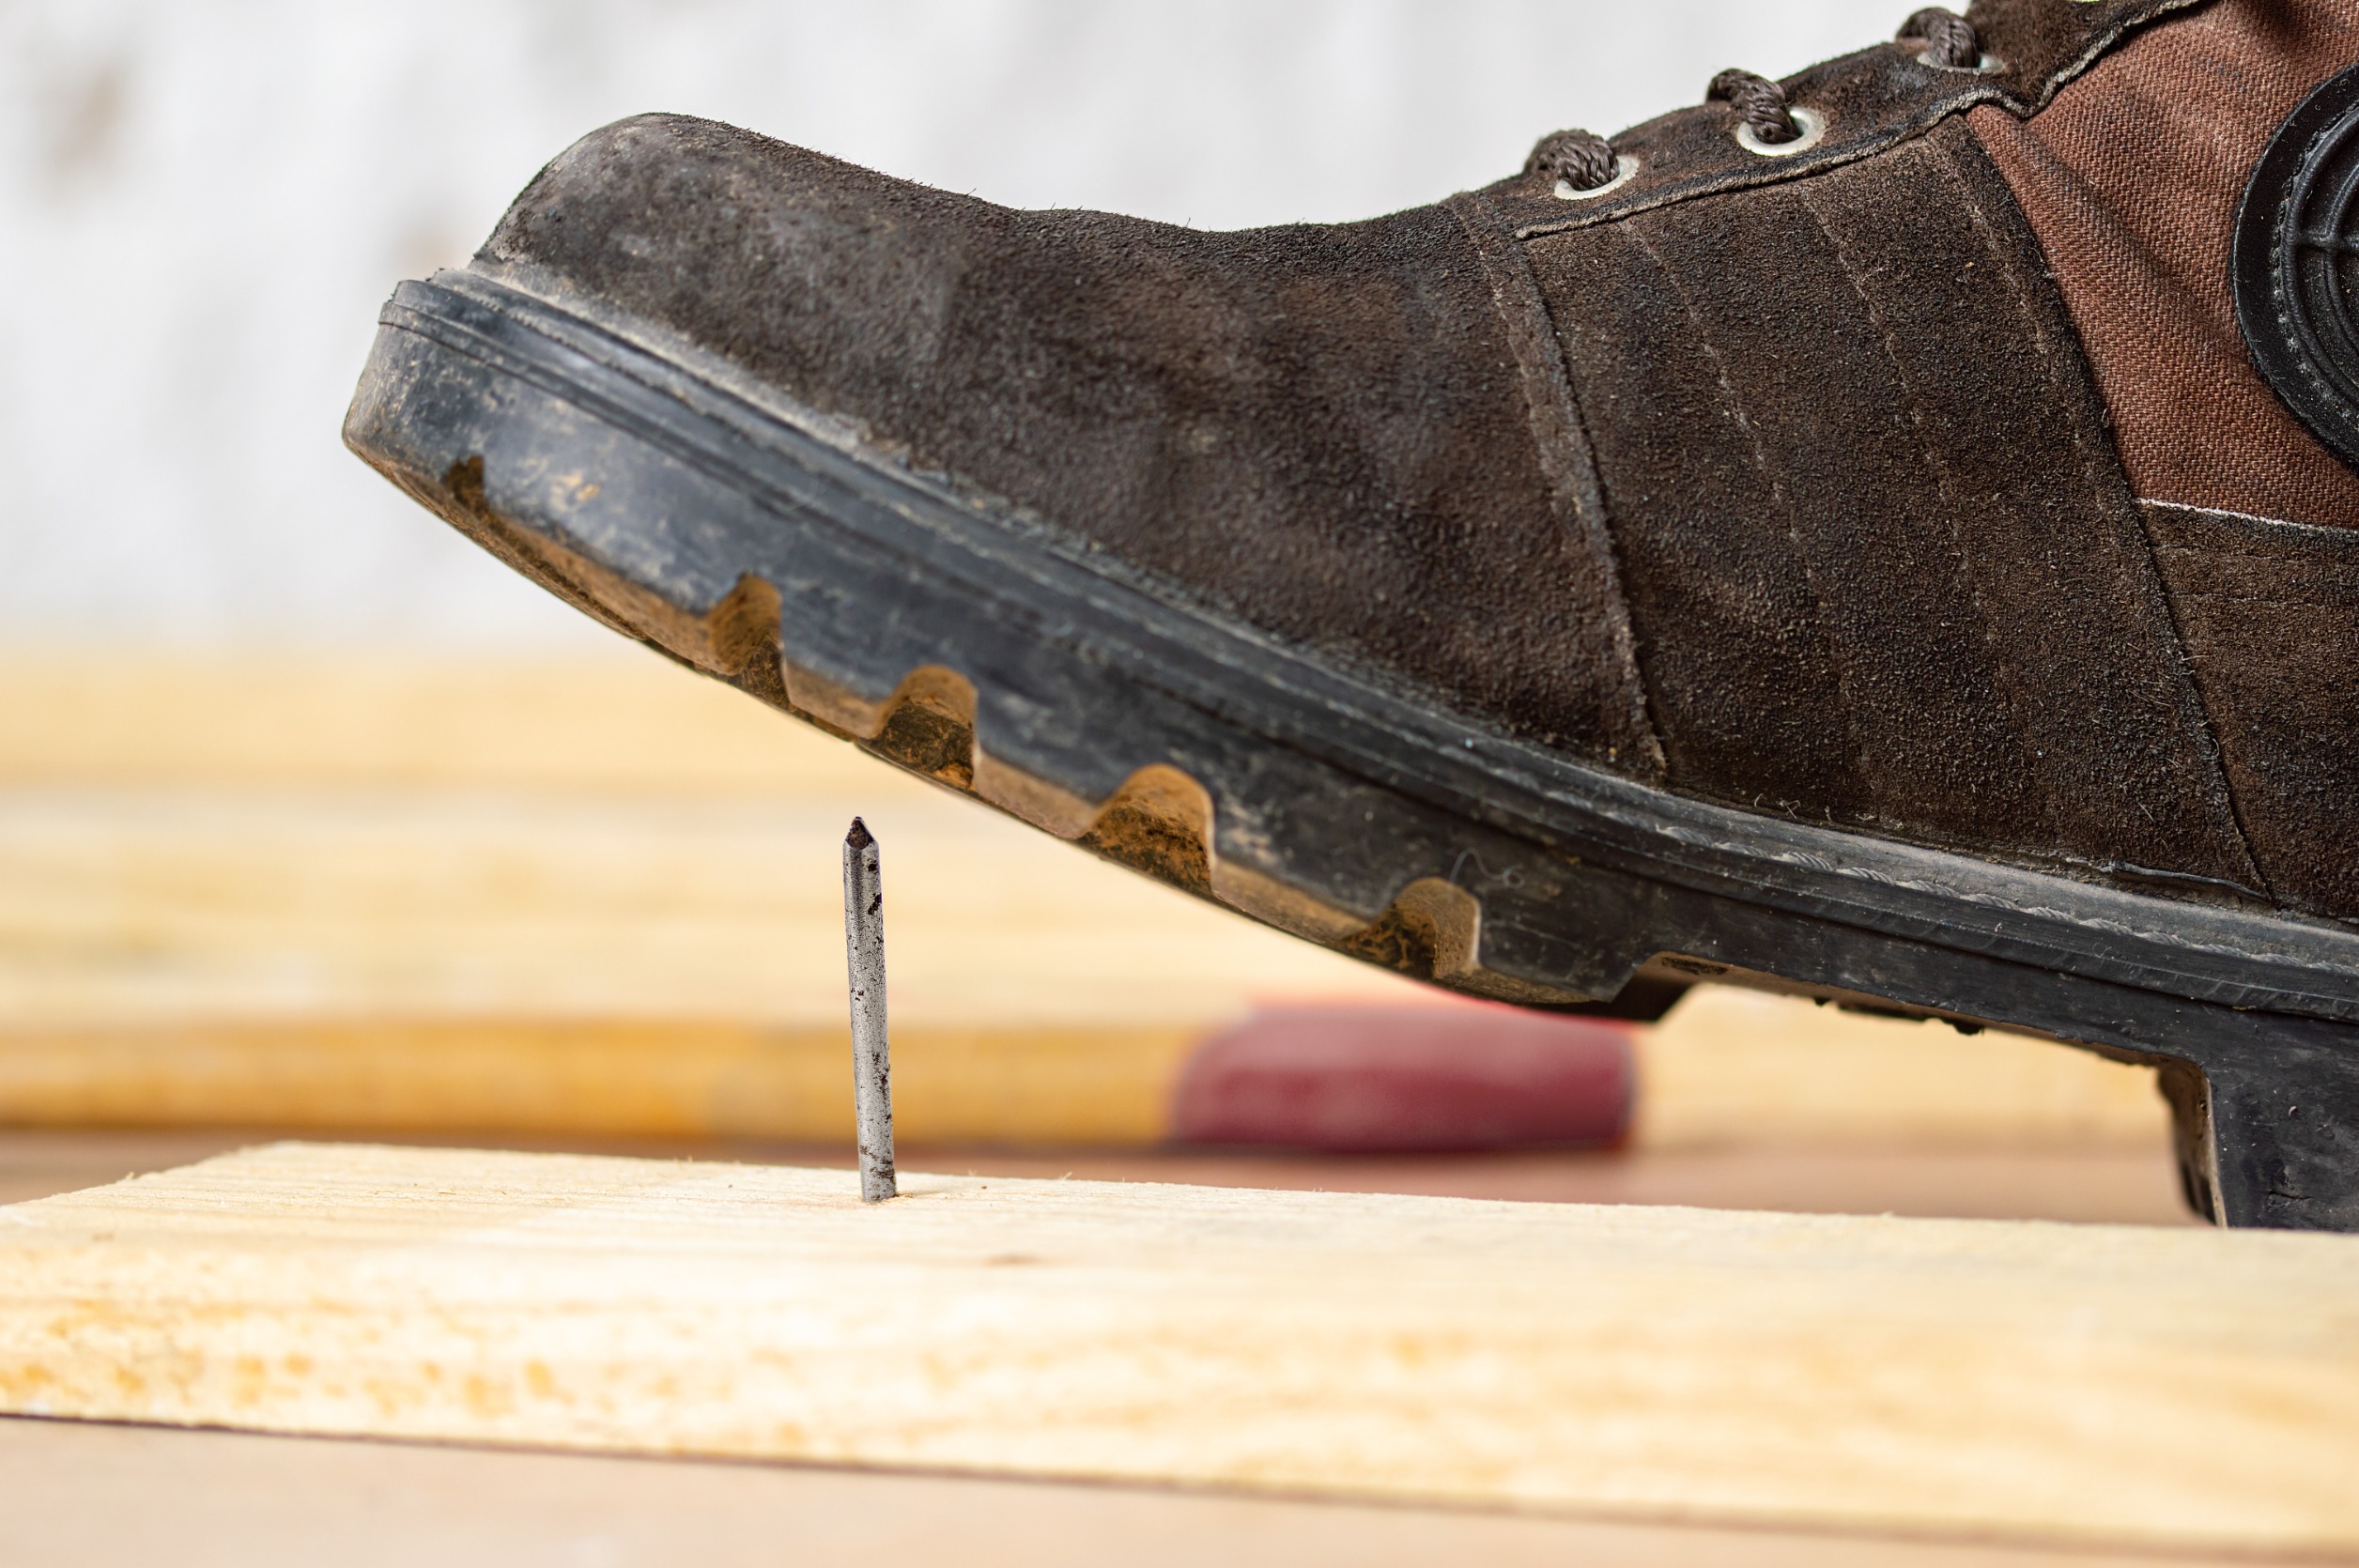 ER or Not: Stepped on a Rusty Nail | University of Utah Health